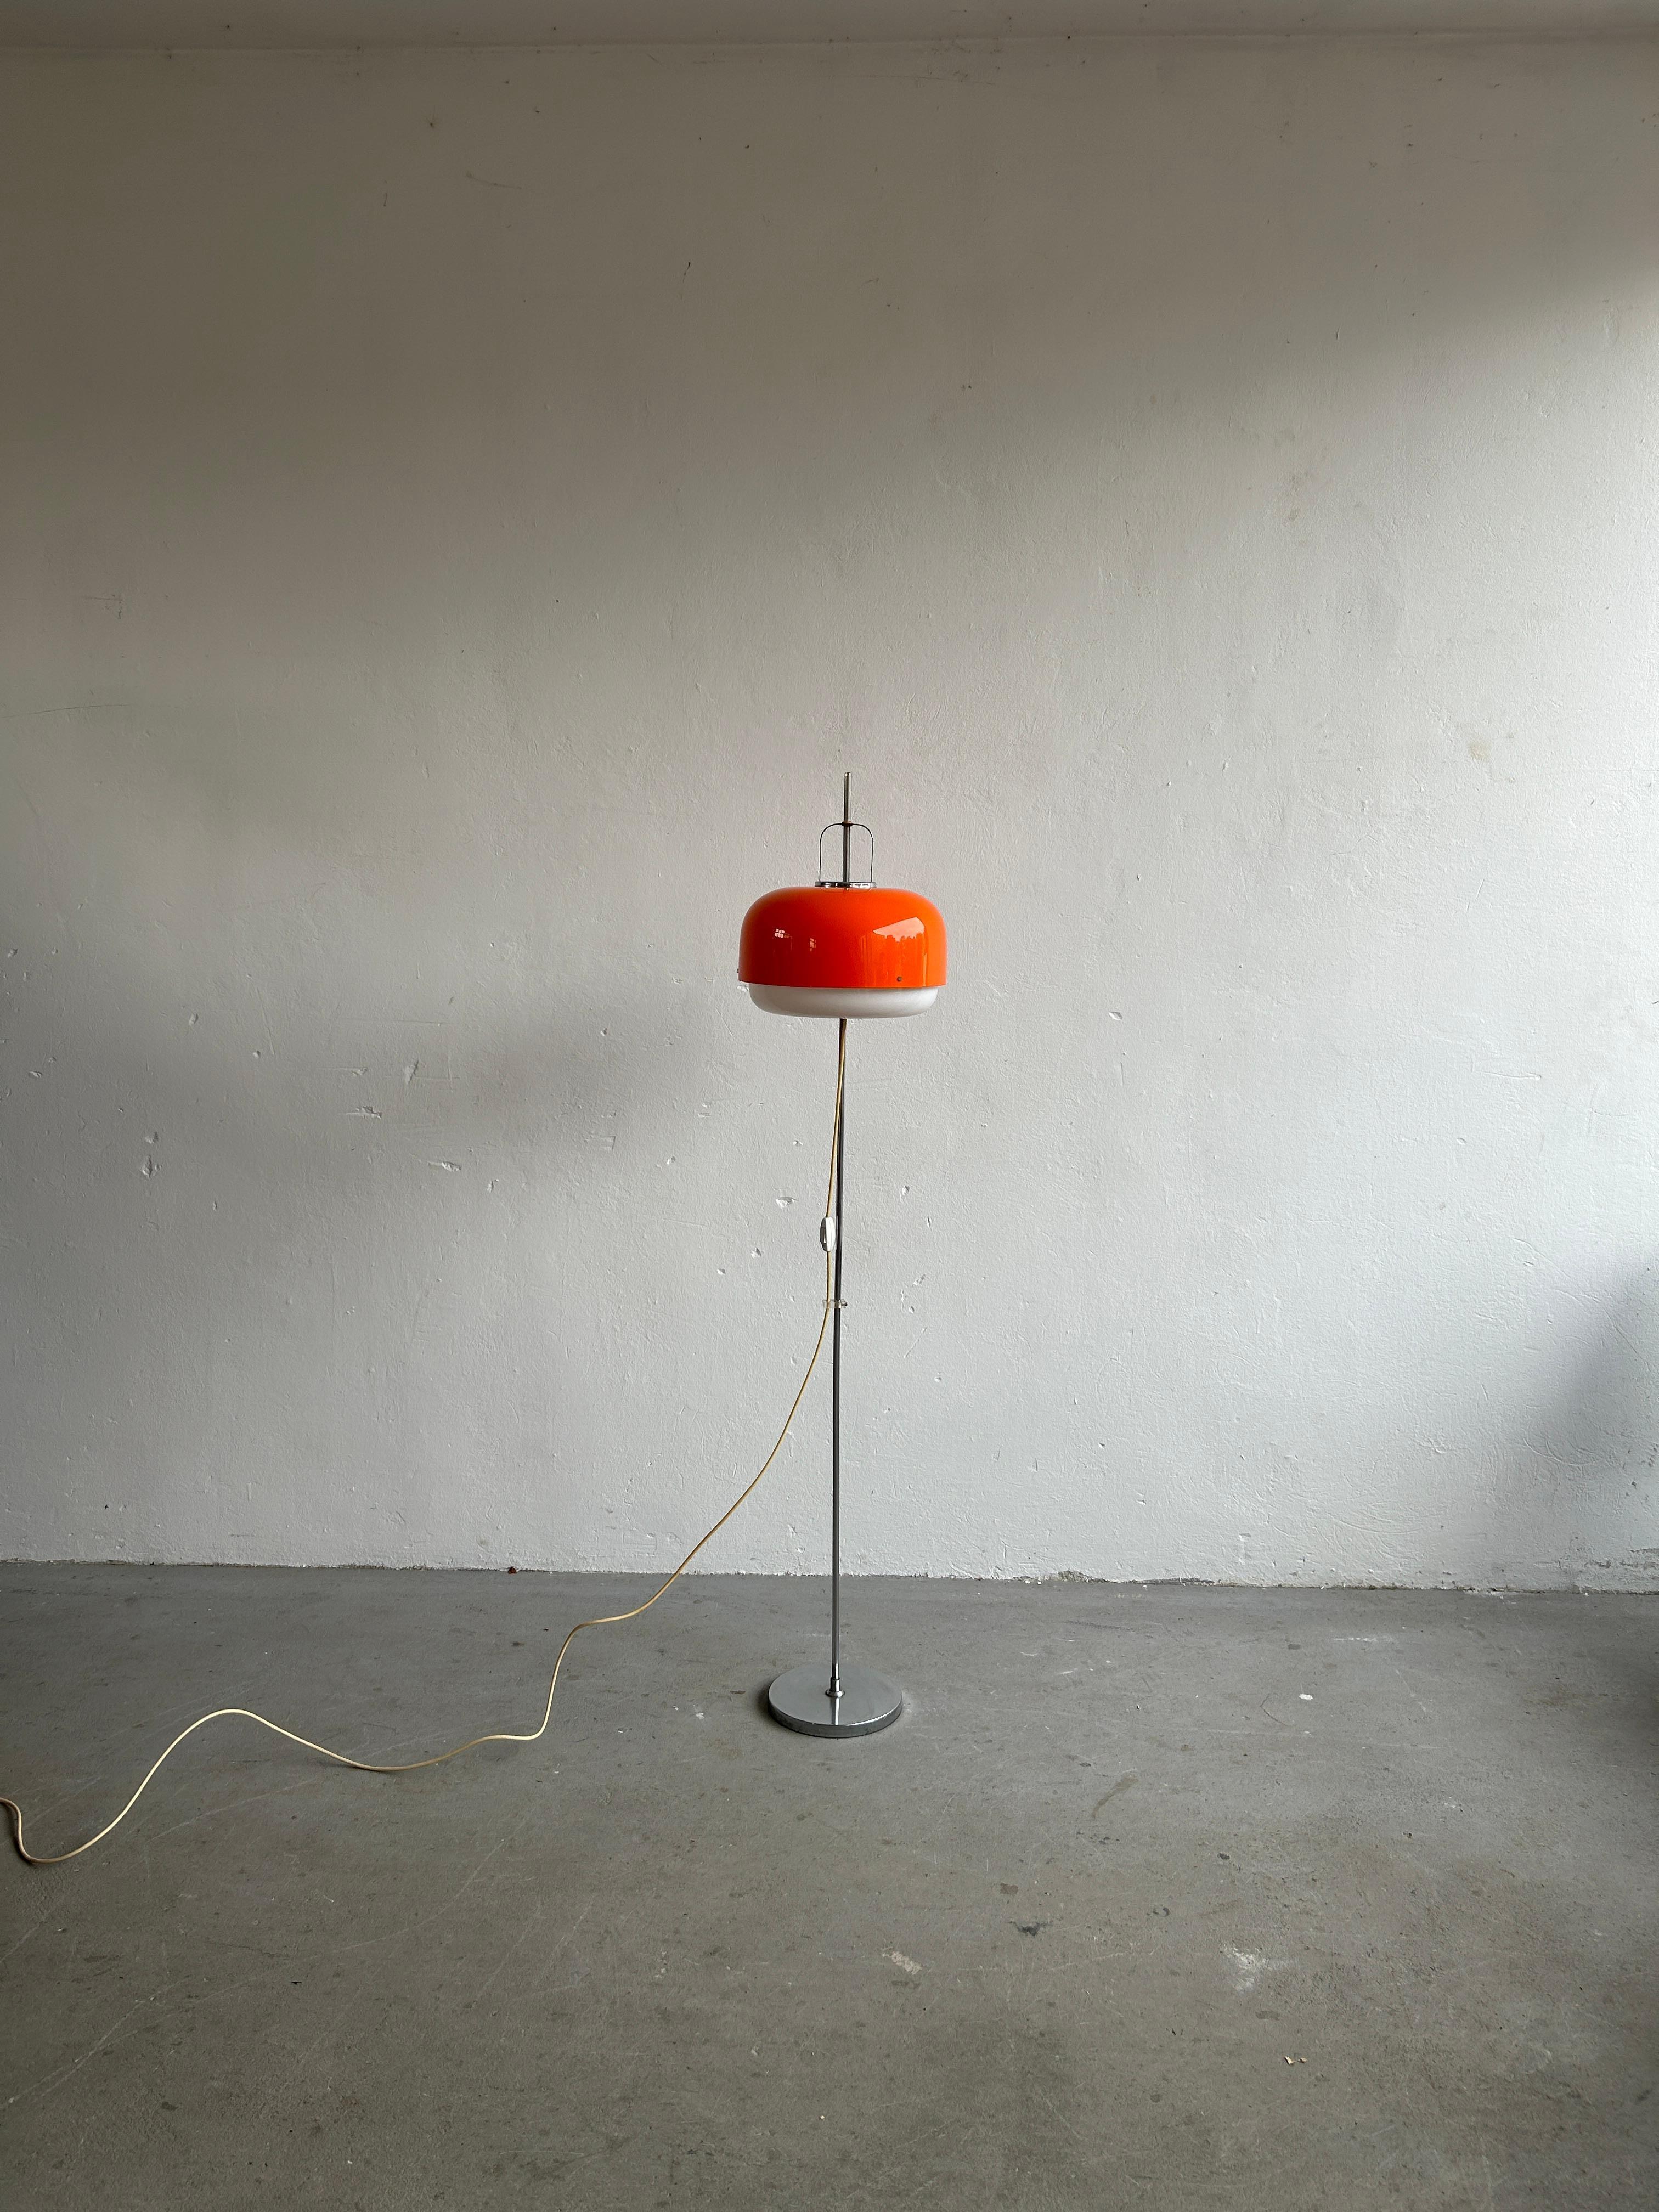 A beautiful orange and white mid century floor lamp designed by Harvey Guzzini Studio for Meblo in the 1970s. Made from chromed metal and plastic. Can be adjusted to any height.

The item is in excellent original vintage condition and fully